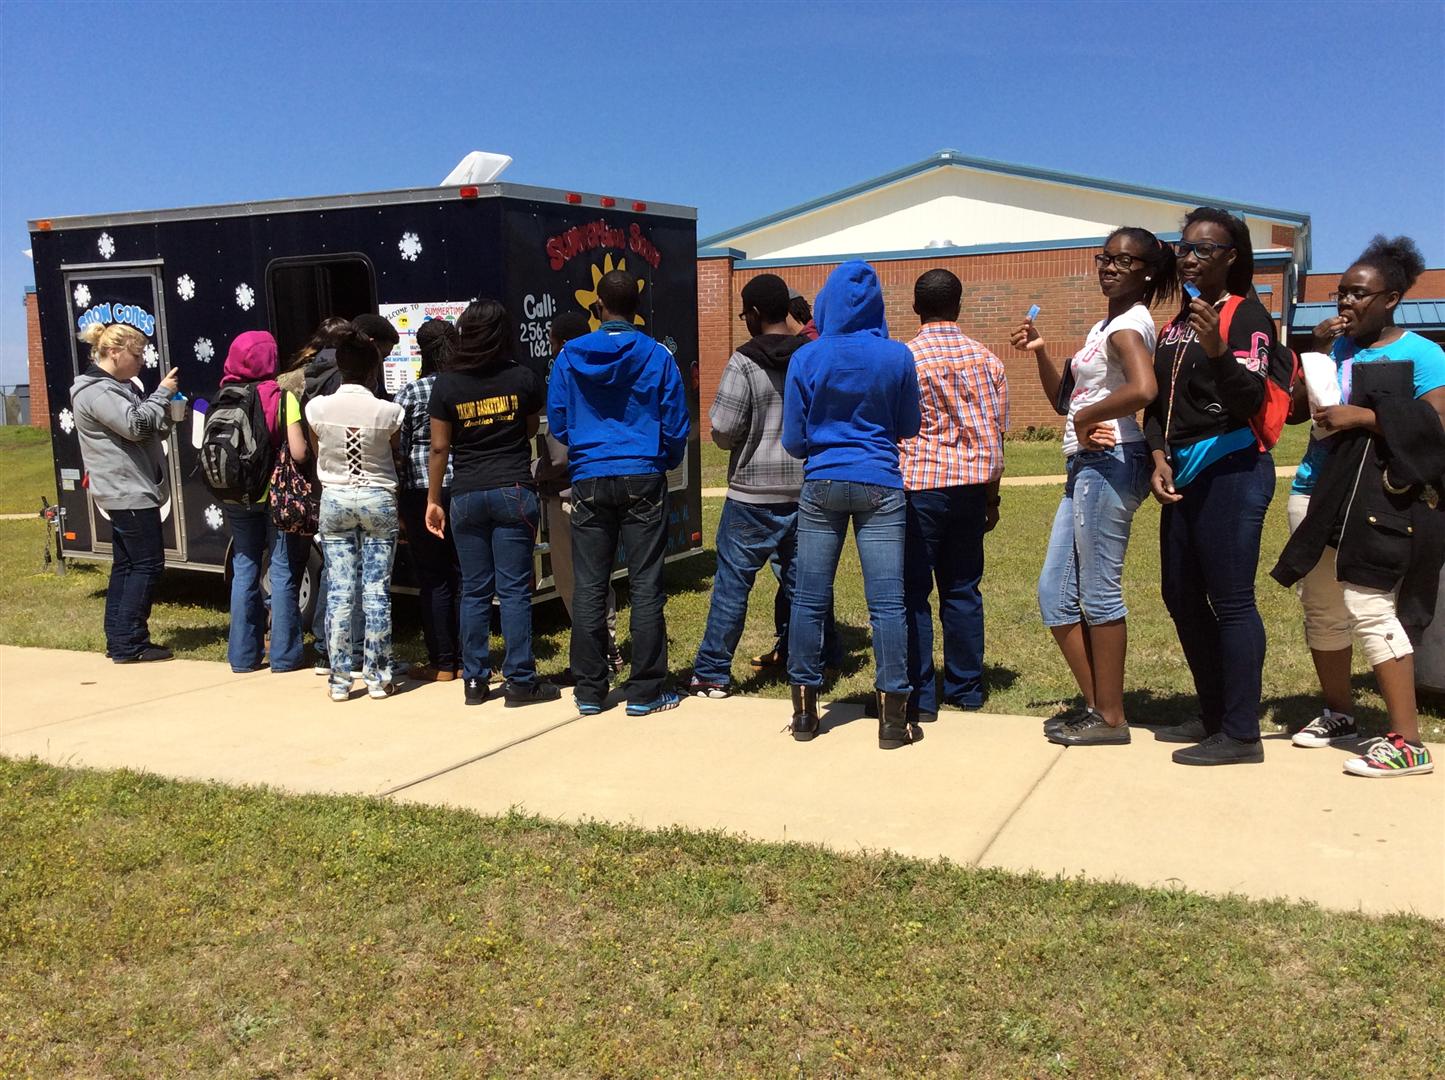 Students wait in line for a snow cone